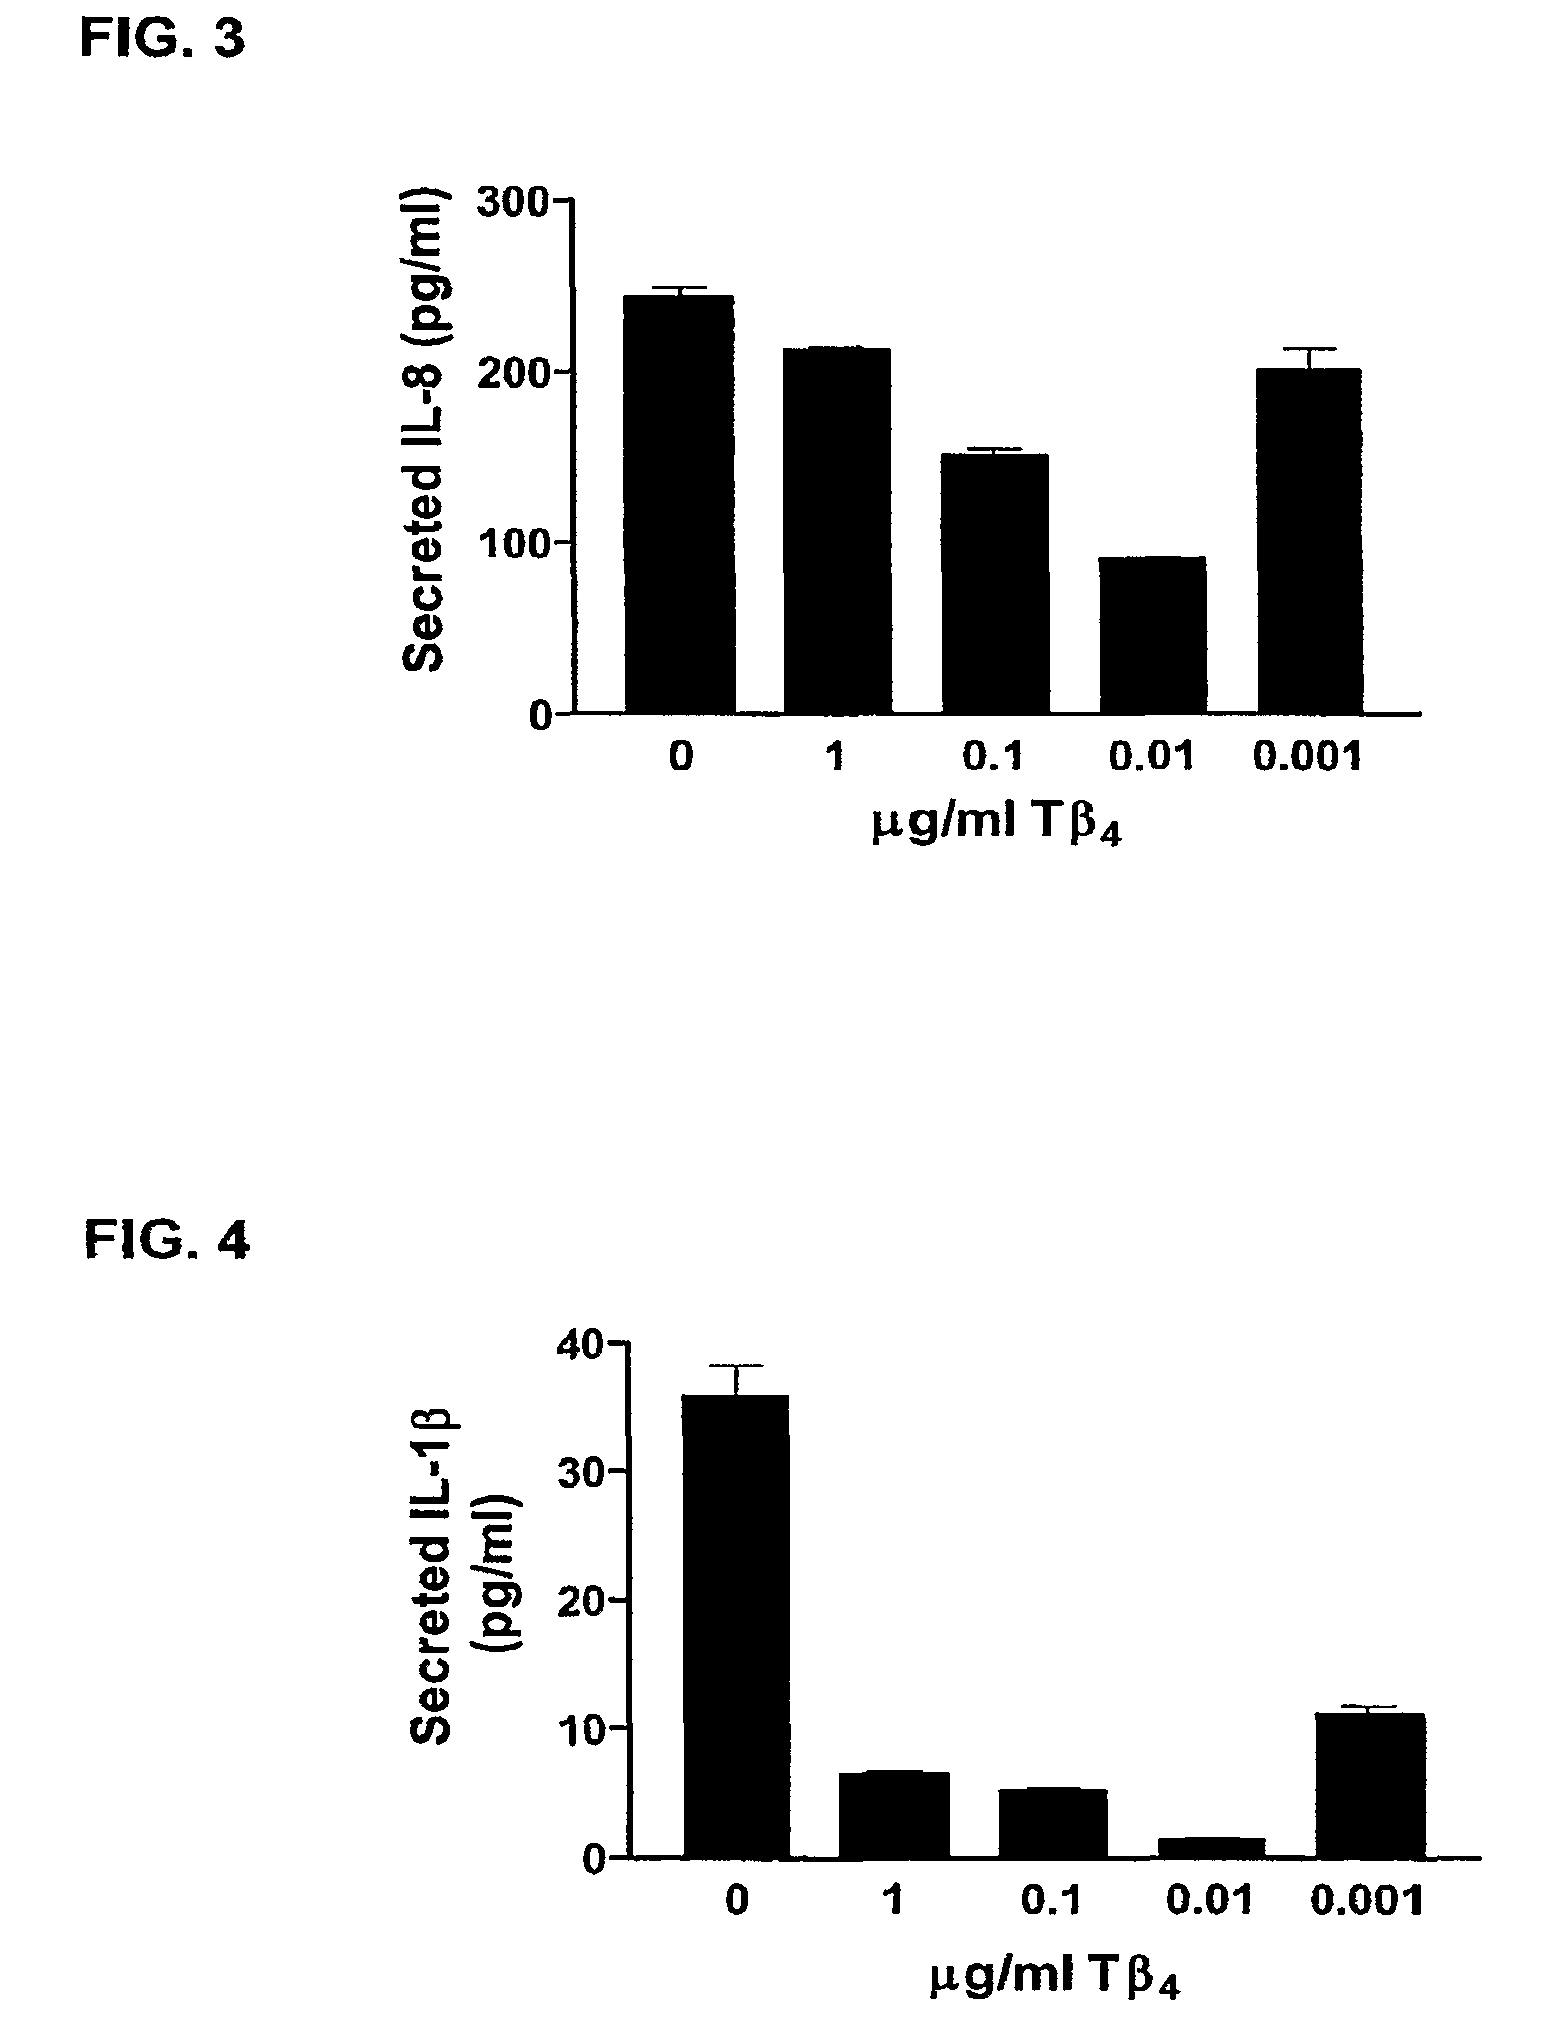 Method of treating or preventing tissue deterioration, injury or damage due to periodontal disease or disease of oral mucosa, and/or downregulating NF-kappabeta or supressing NF-kappabeta-mediated actions